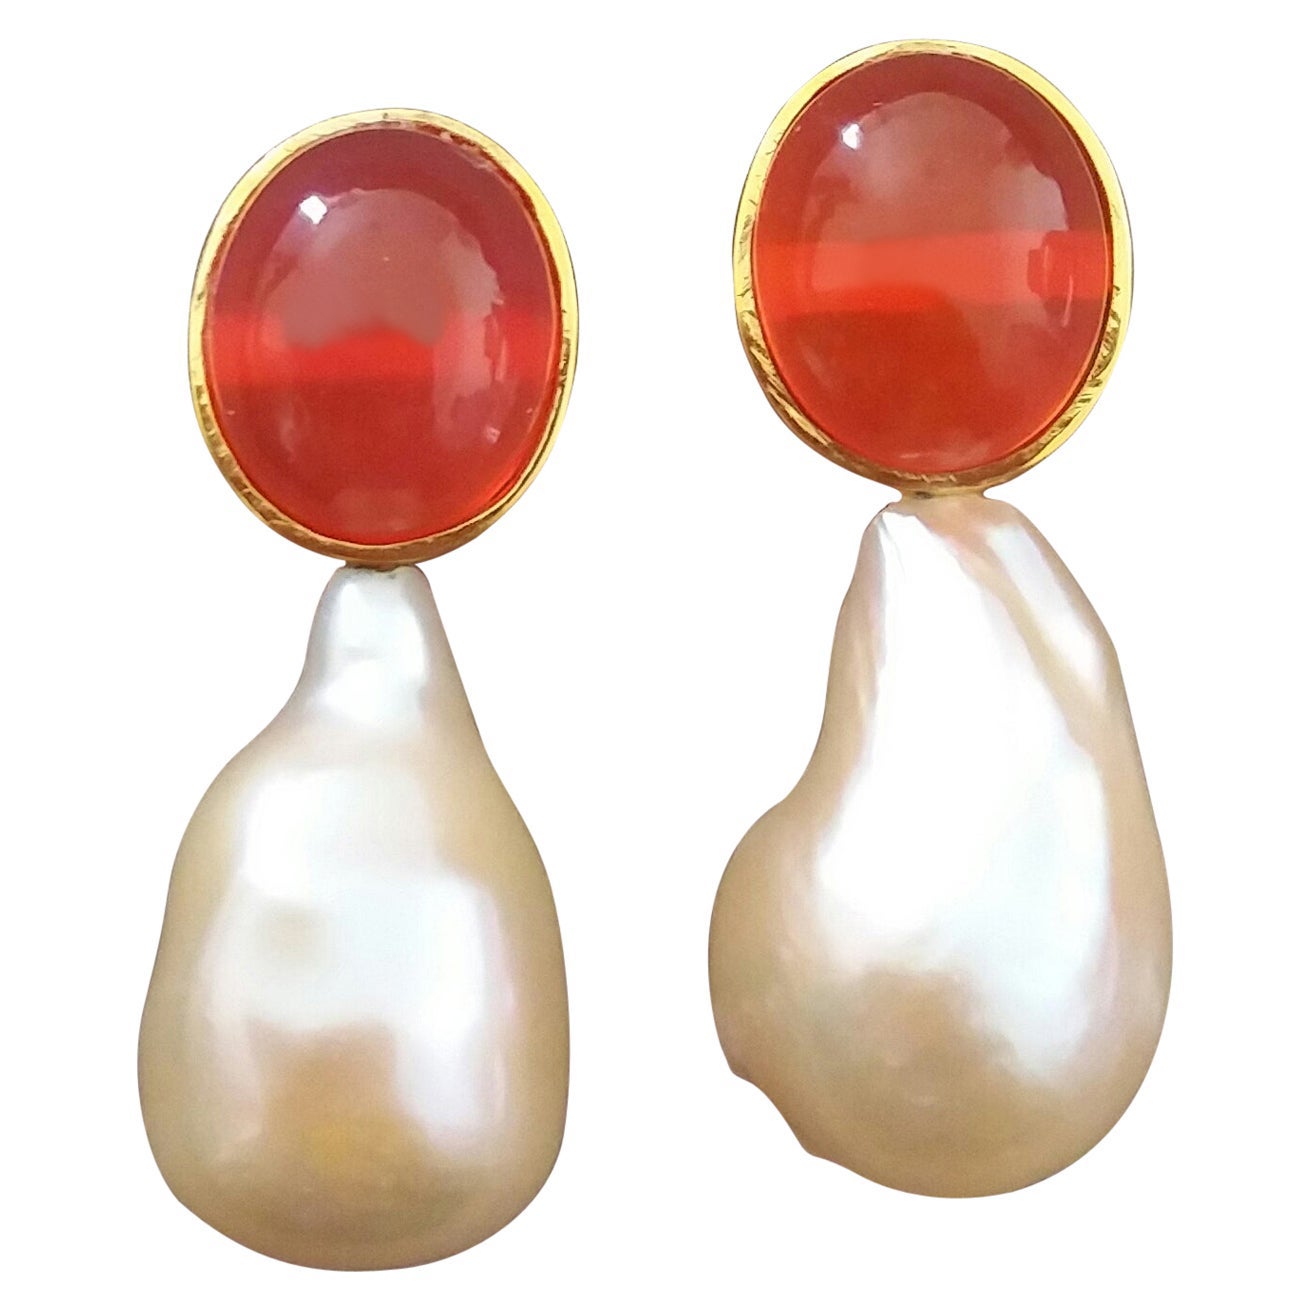 Oval Fire Opal Cabochons Cream Color Baroque Pearls 14K Gold Bezel Stud Earrings For Sale